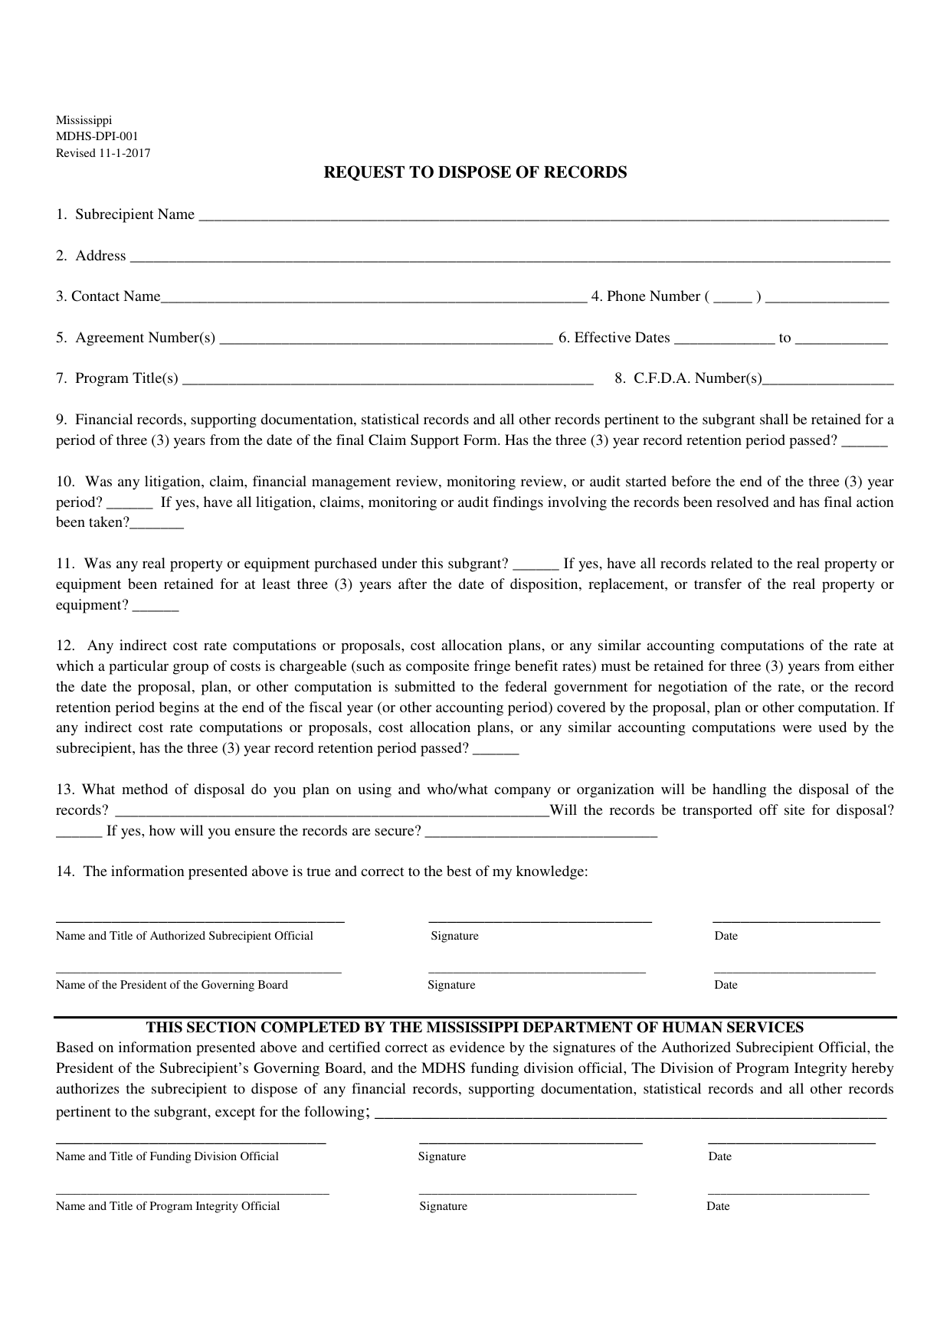 Form MDHS-DPI-001 Request to Dispose of Records - Mississippi, Page 1